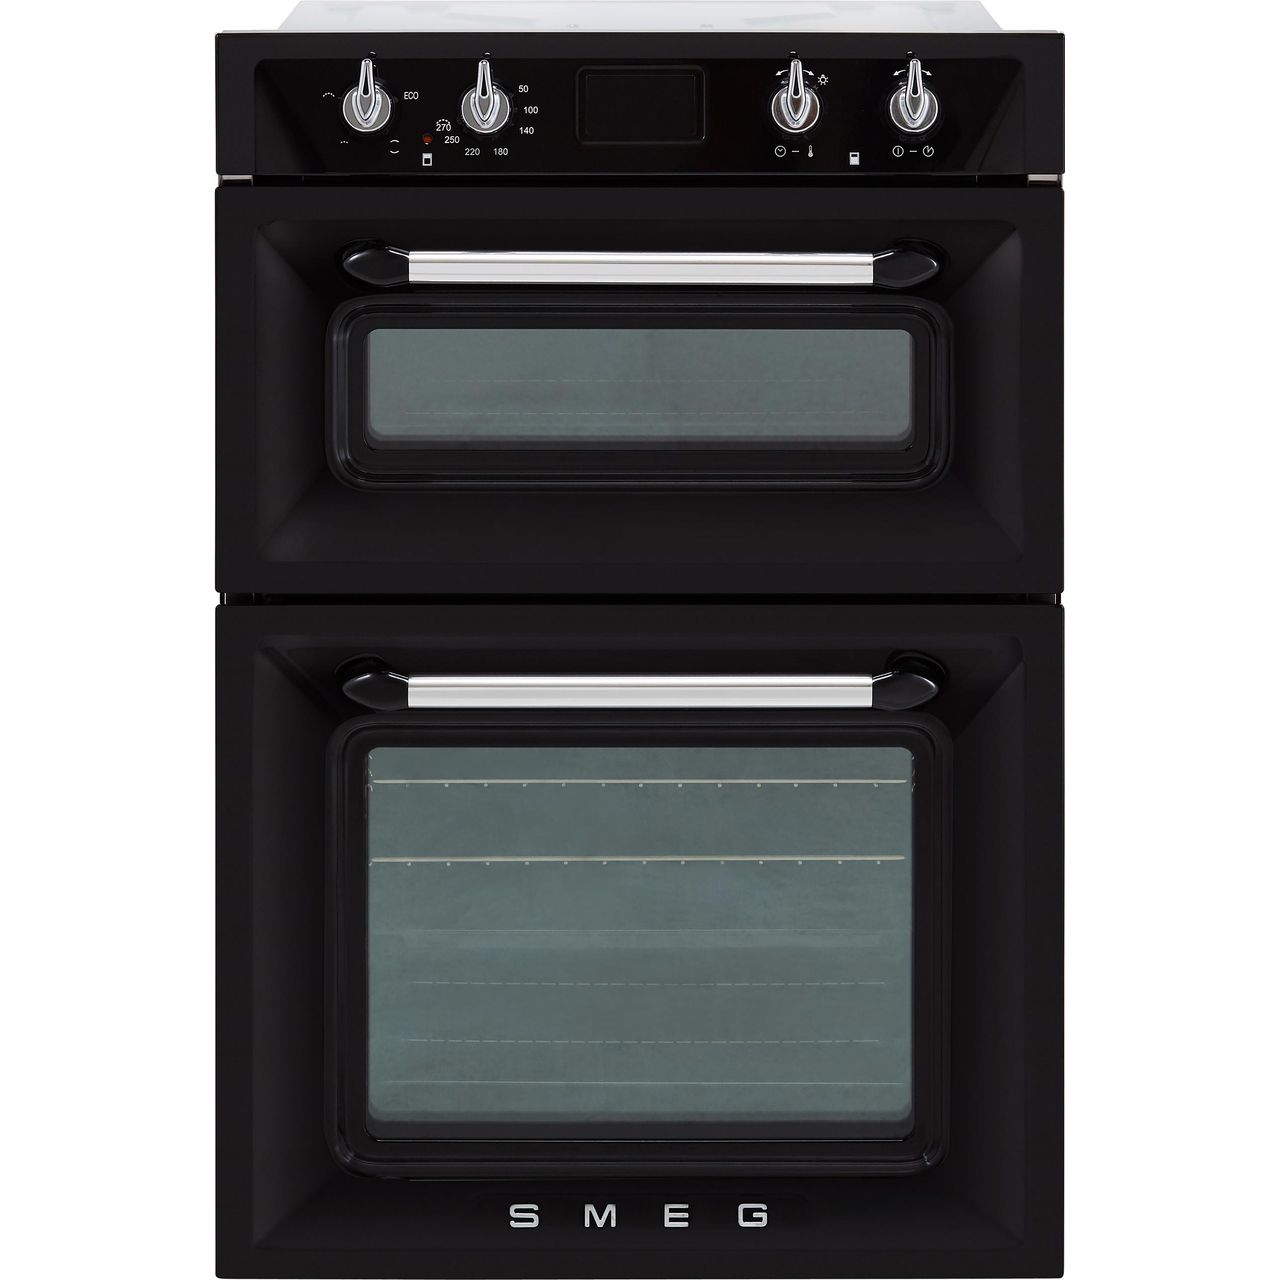 Smeg Victoria DOSF6920N1 Built In Double Oven Review